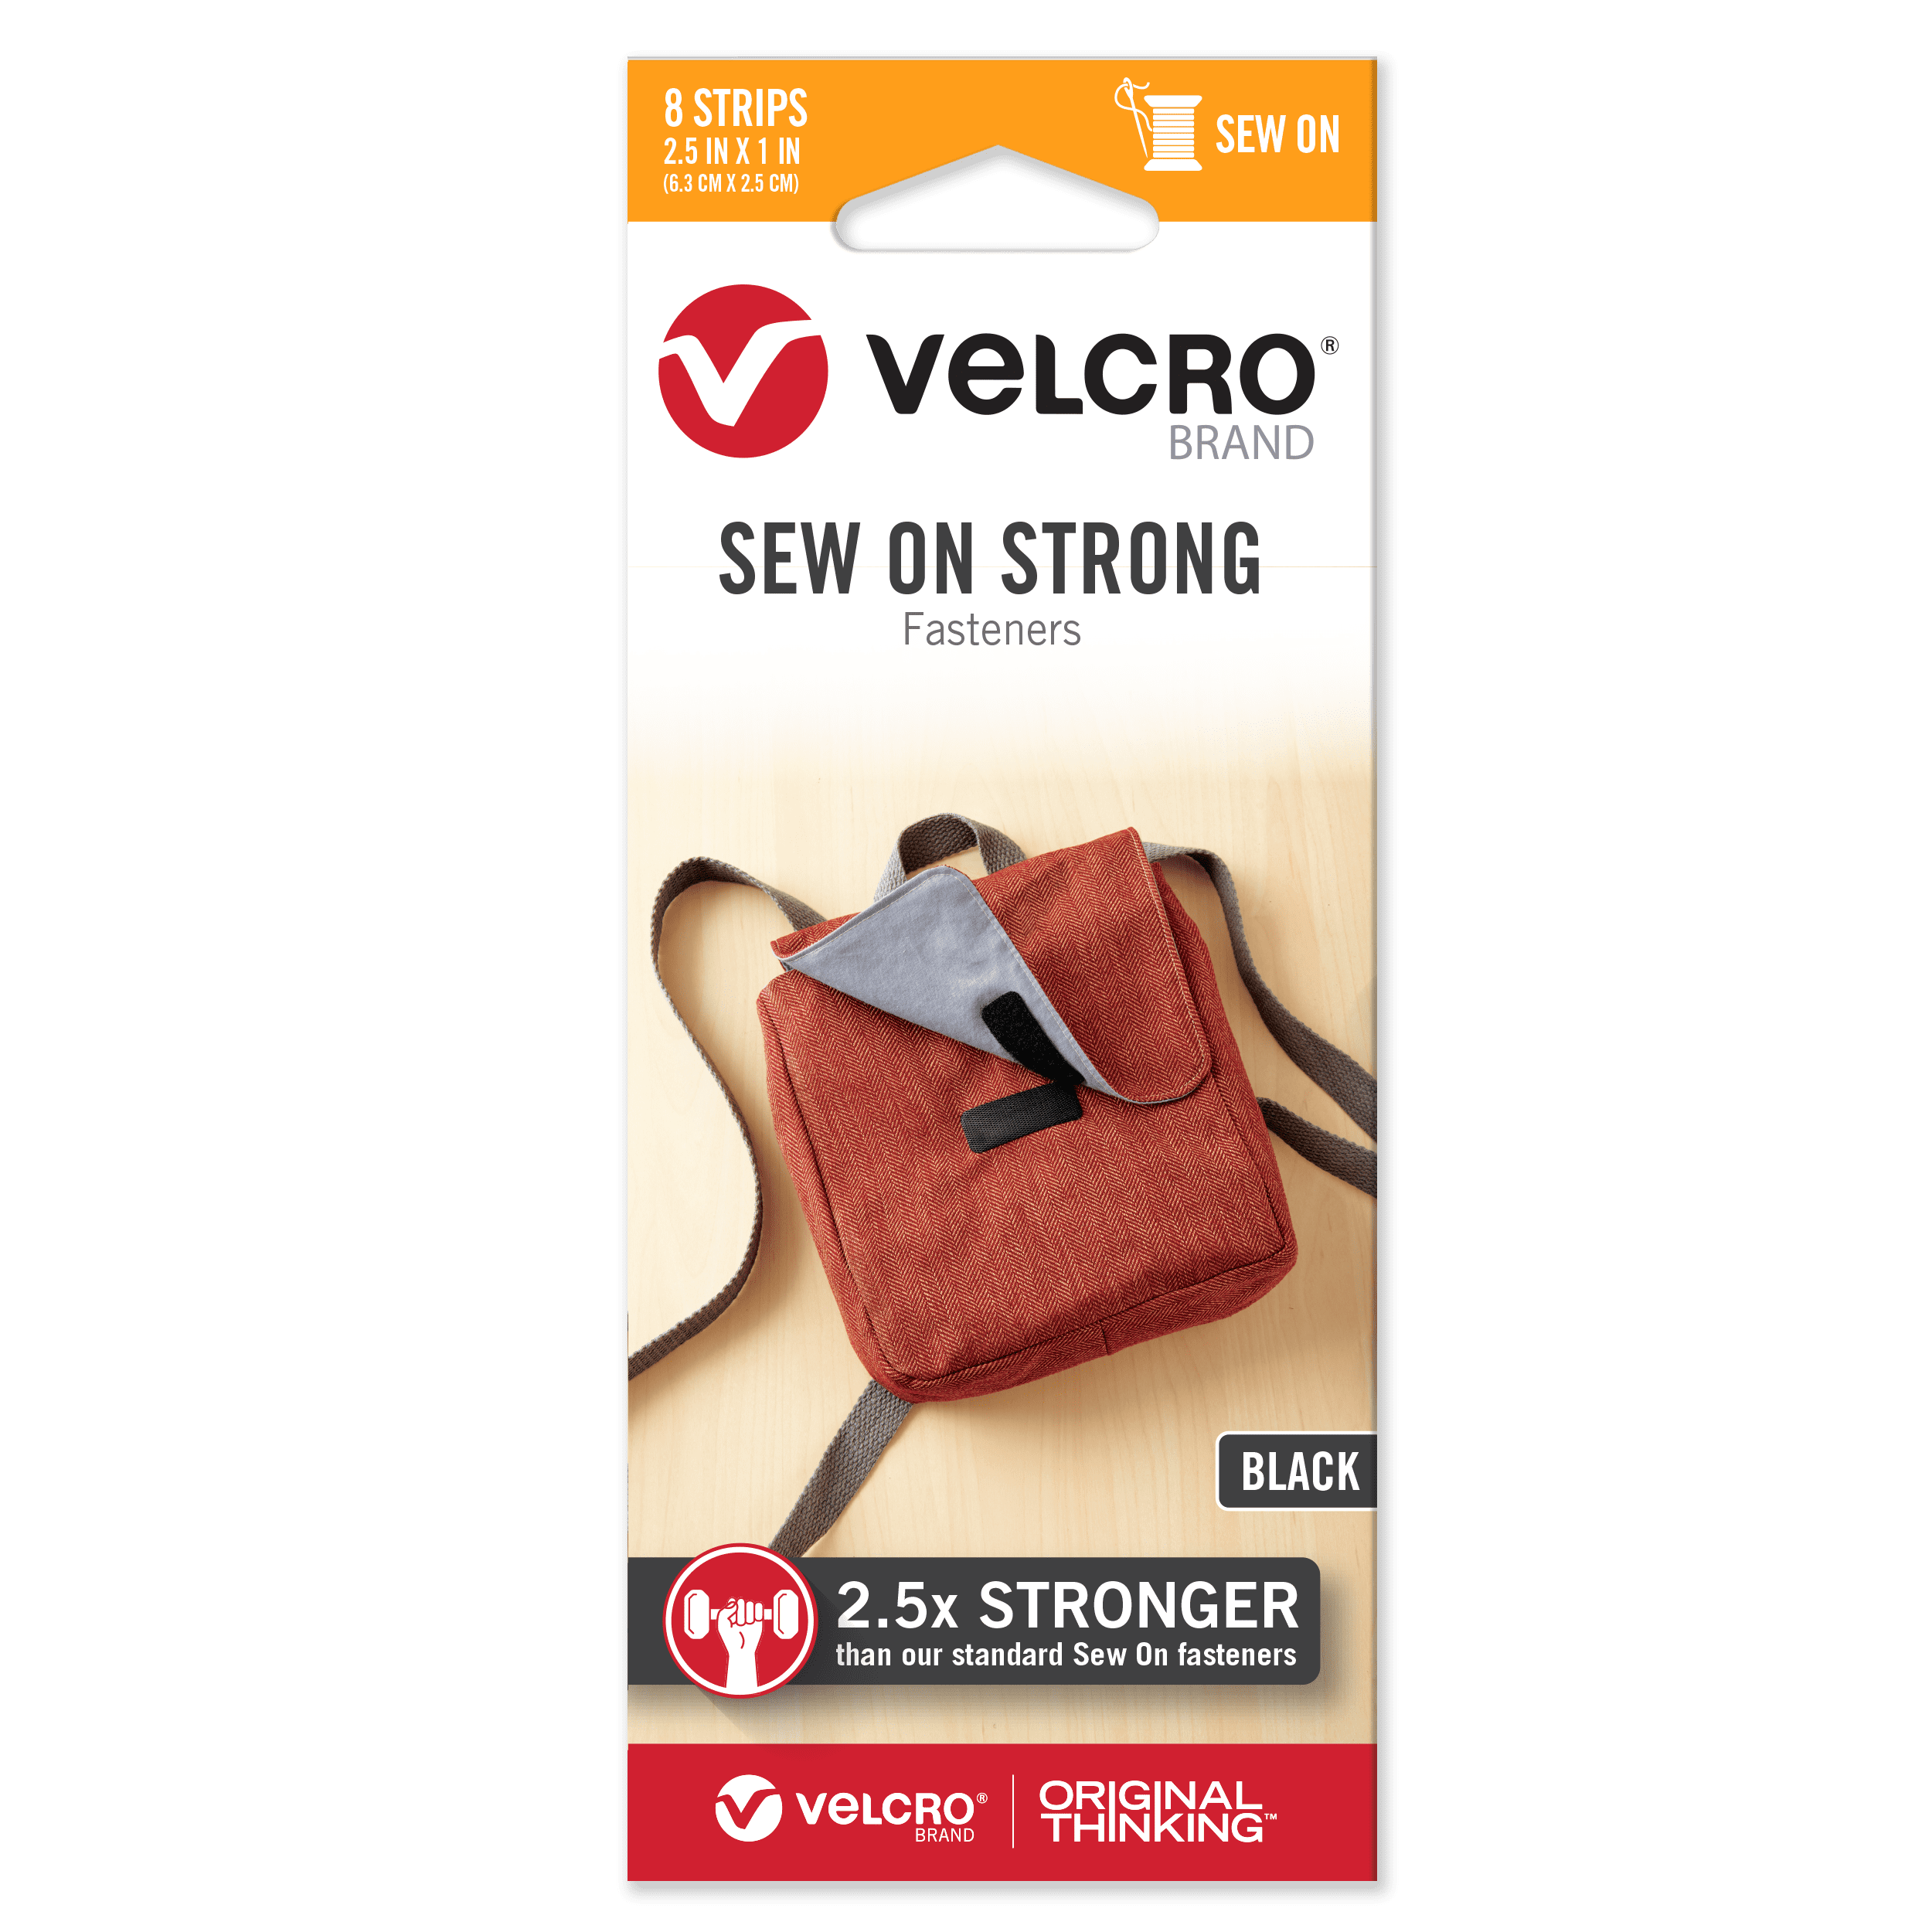 VELCRO® Brand Sewing Fasteners